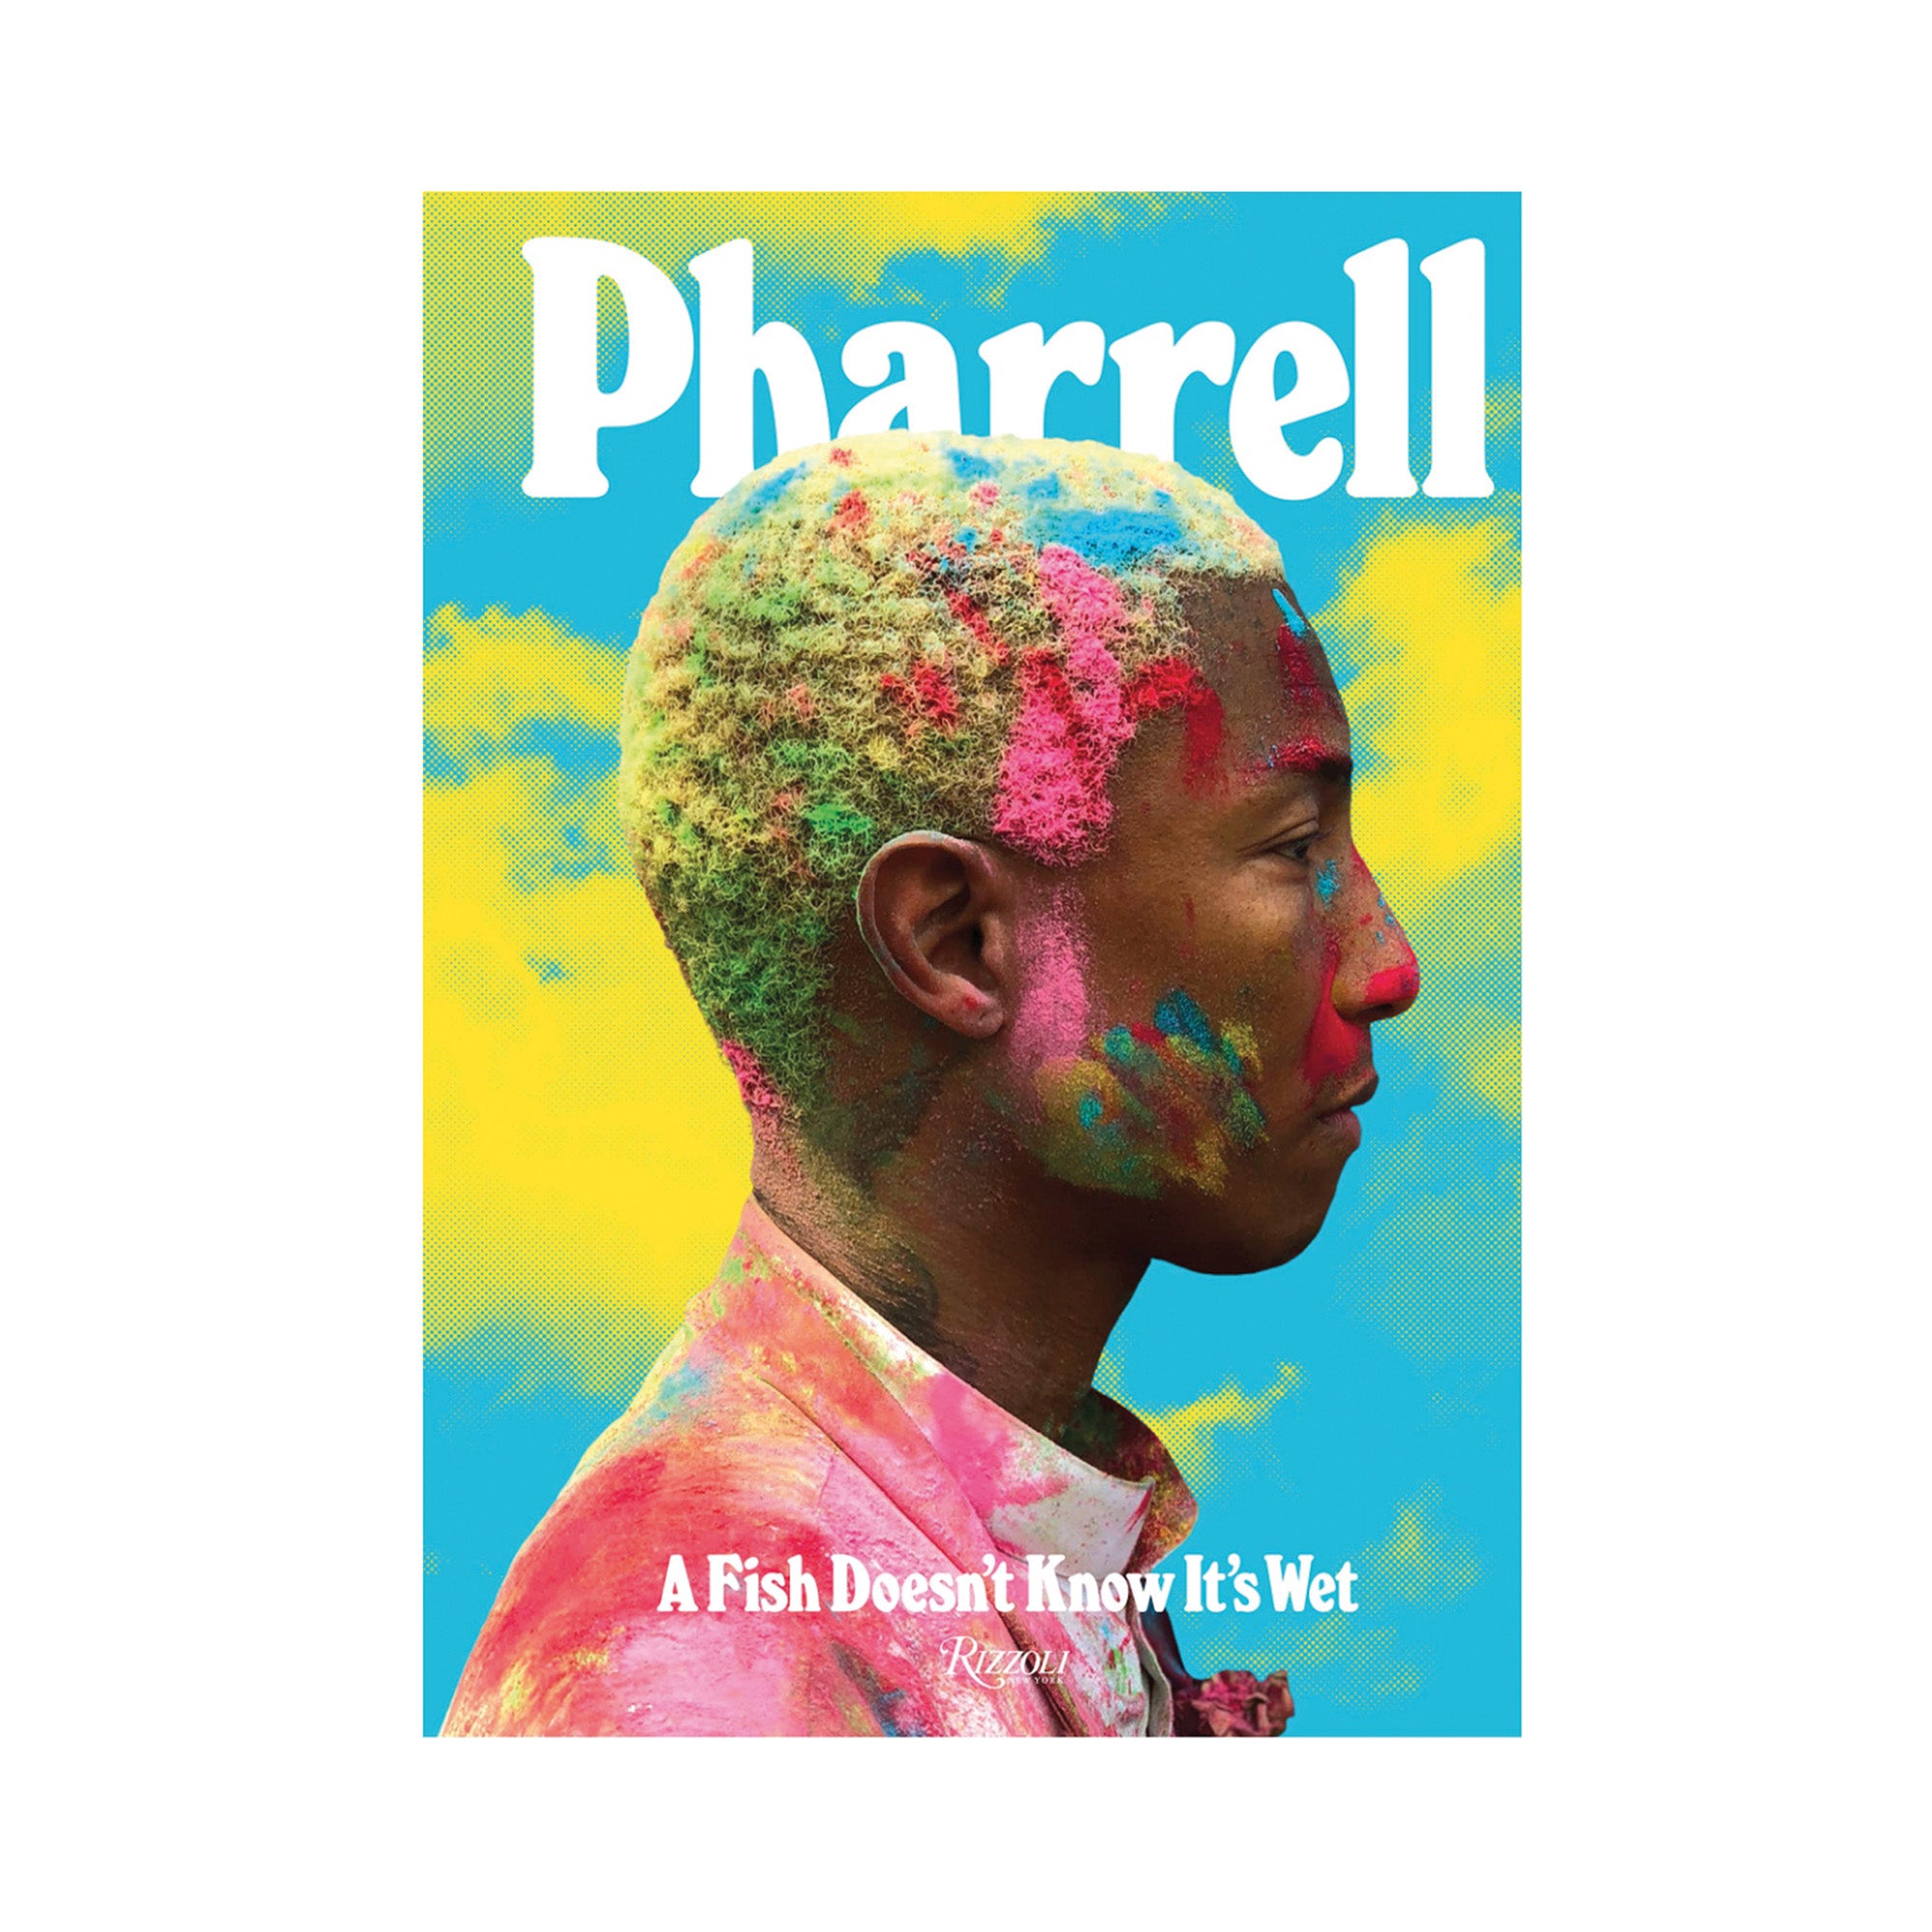 Pharrell: A Fish Doesn't Know It's Wet - Hardcover